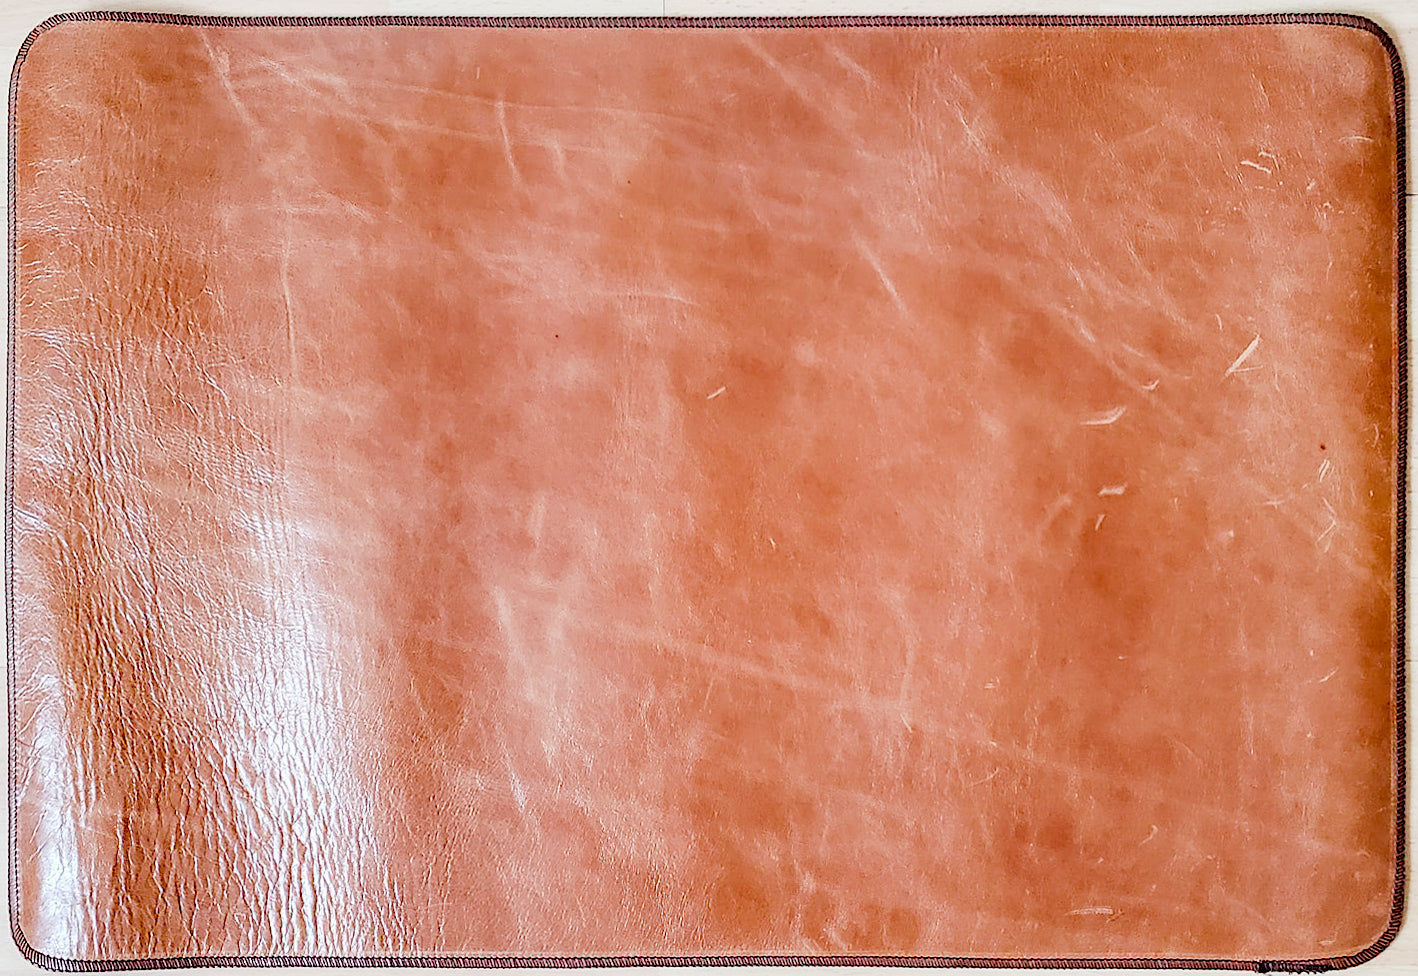 Brown Leather - MTG Playmat